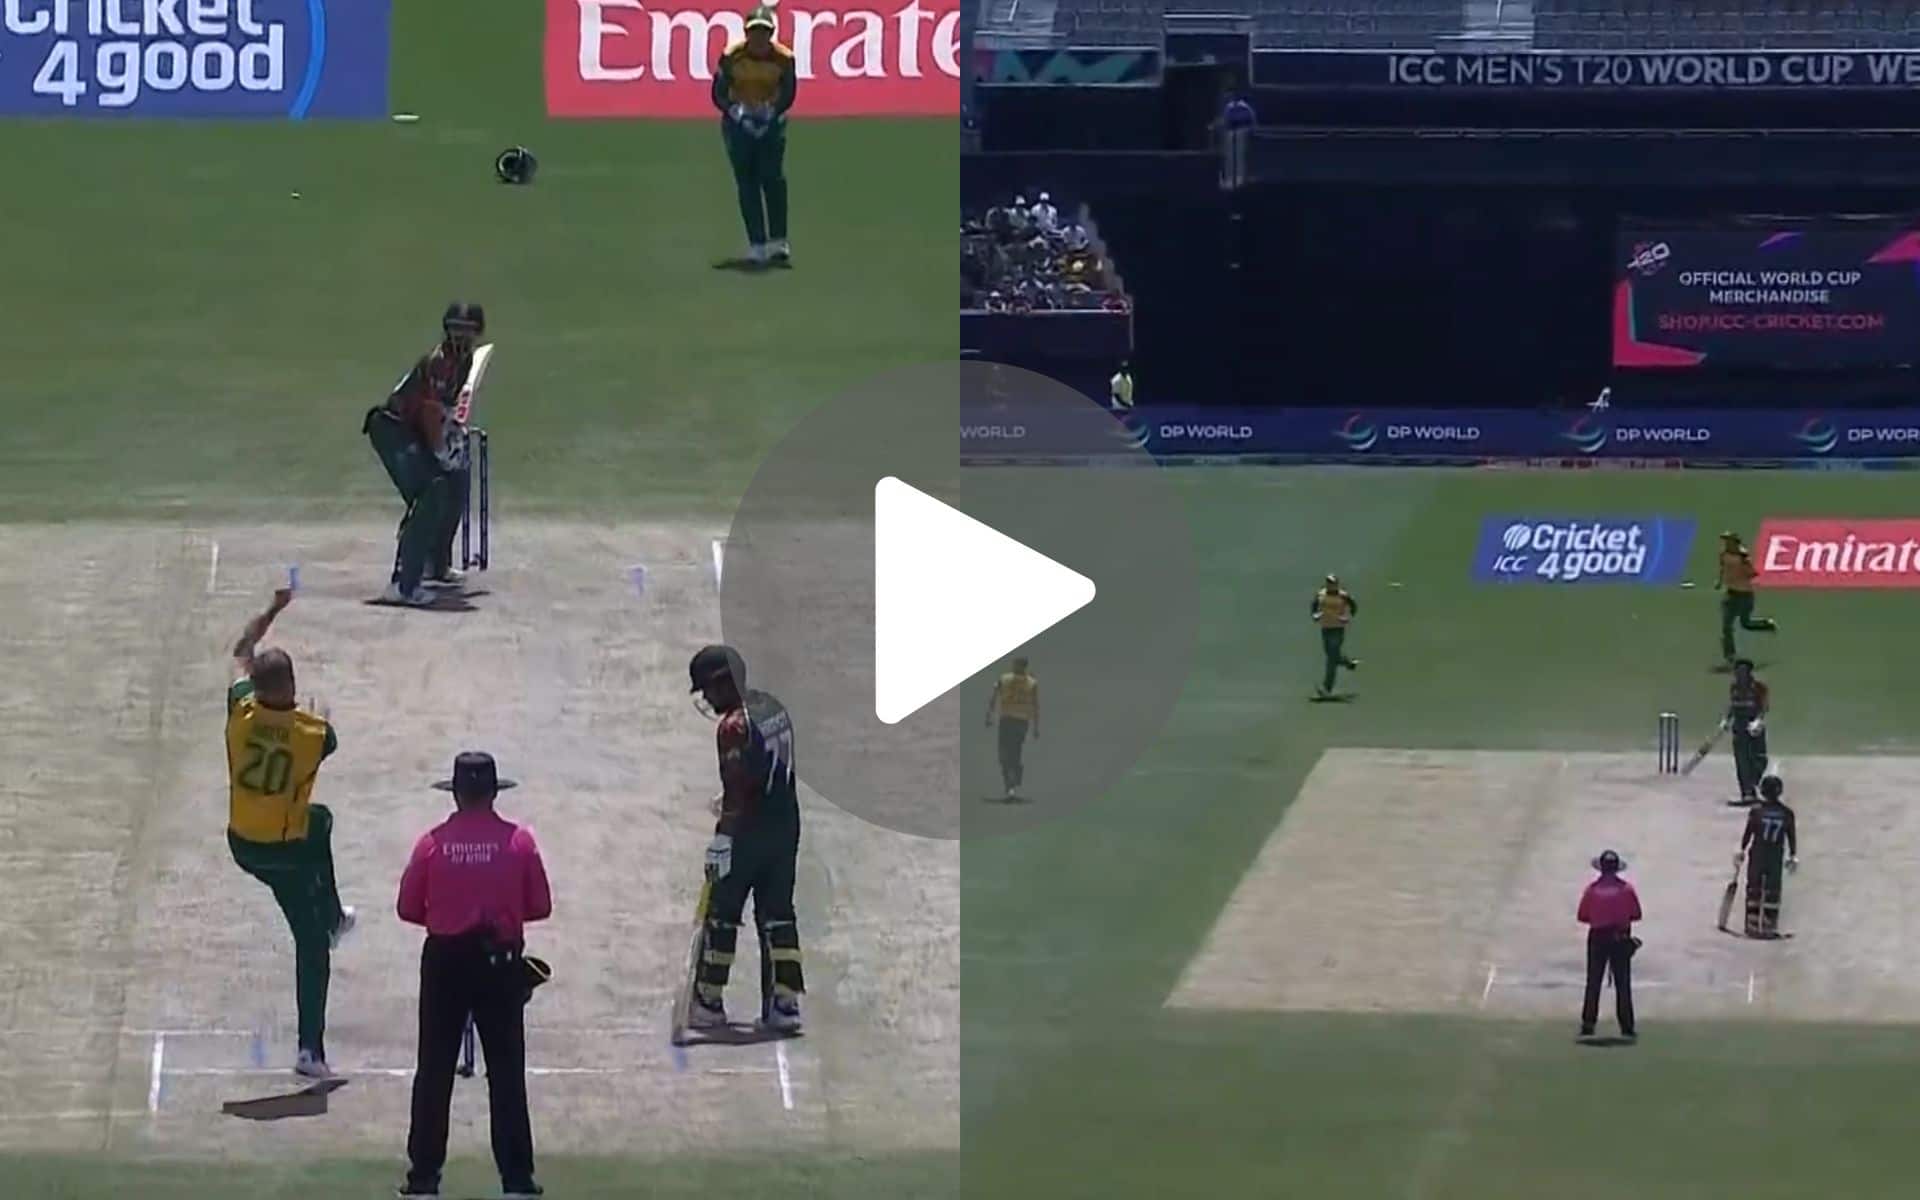 [Watch] Najmul Hossain Shanto Finds Anrich Nortje's Nasty Bouncer 'Too Hot To Handle'